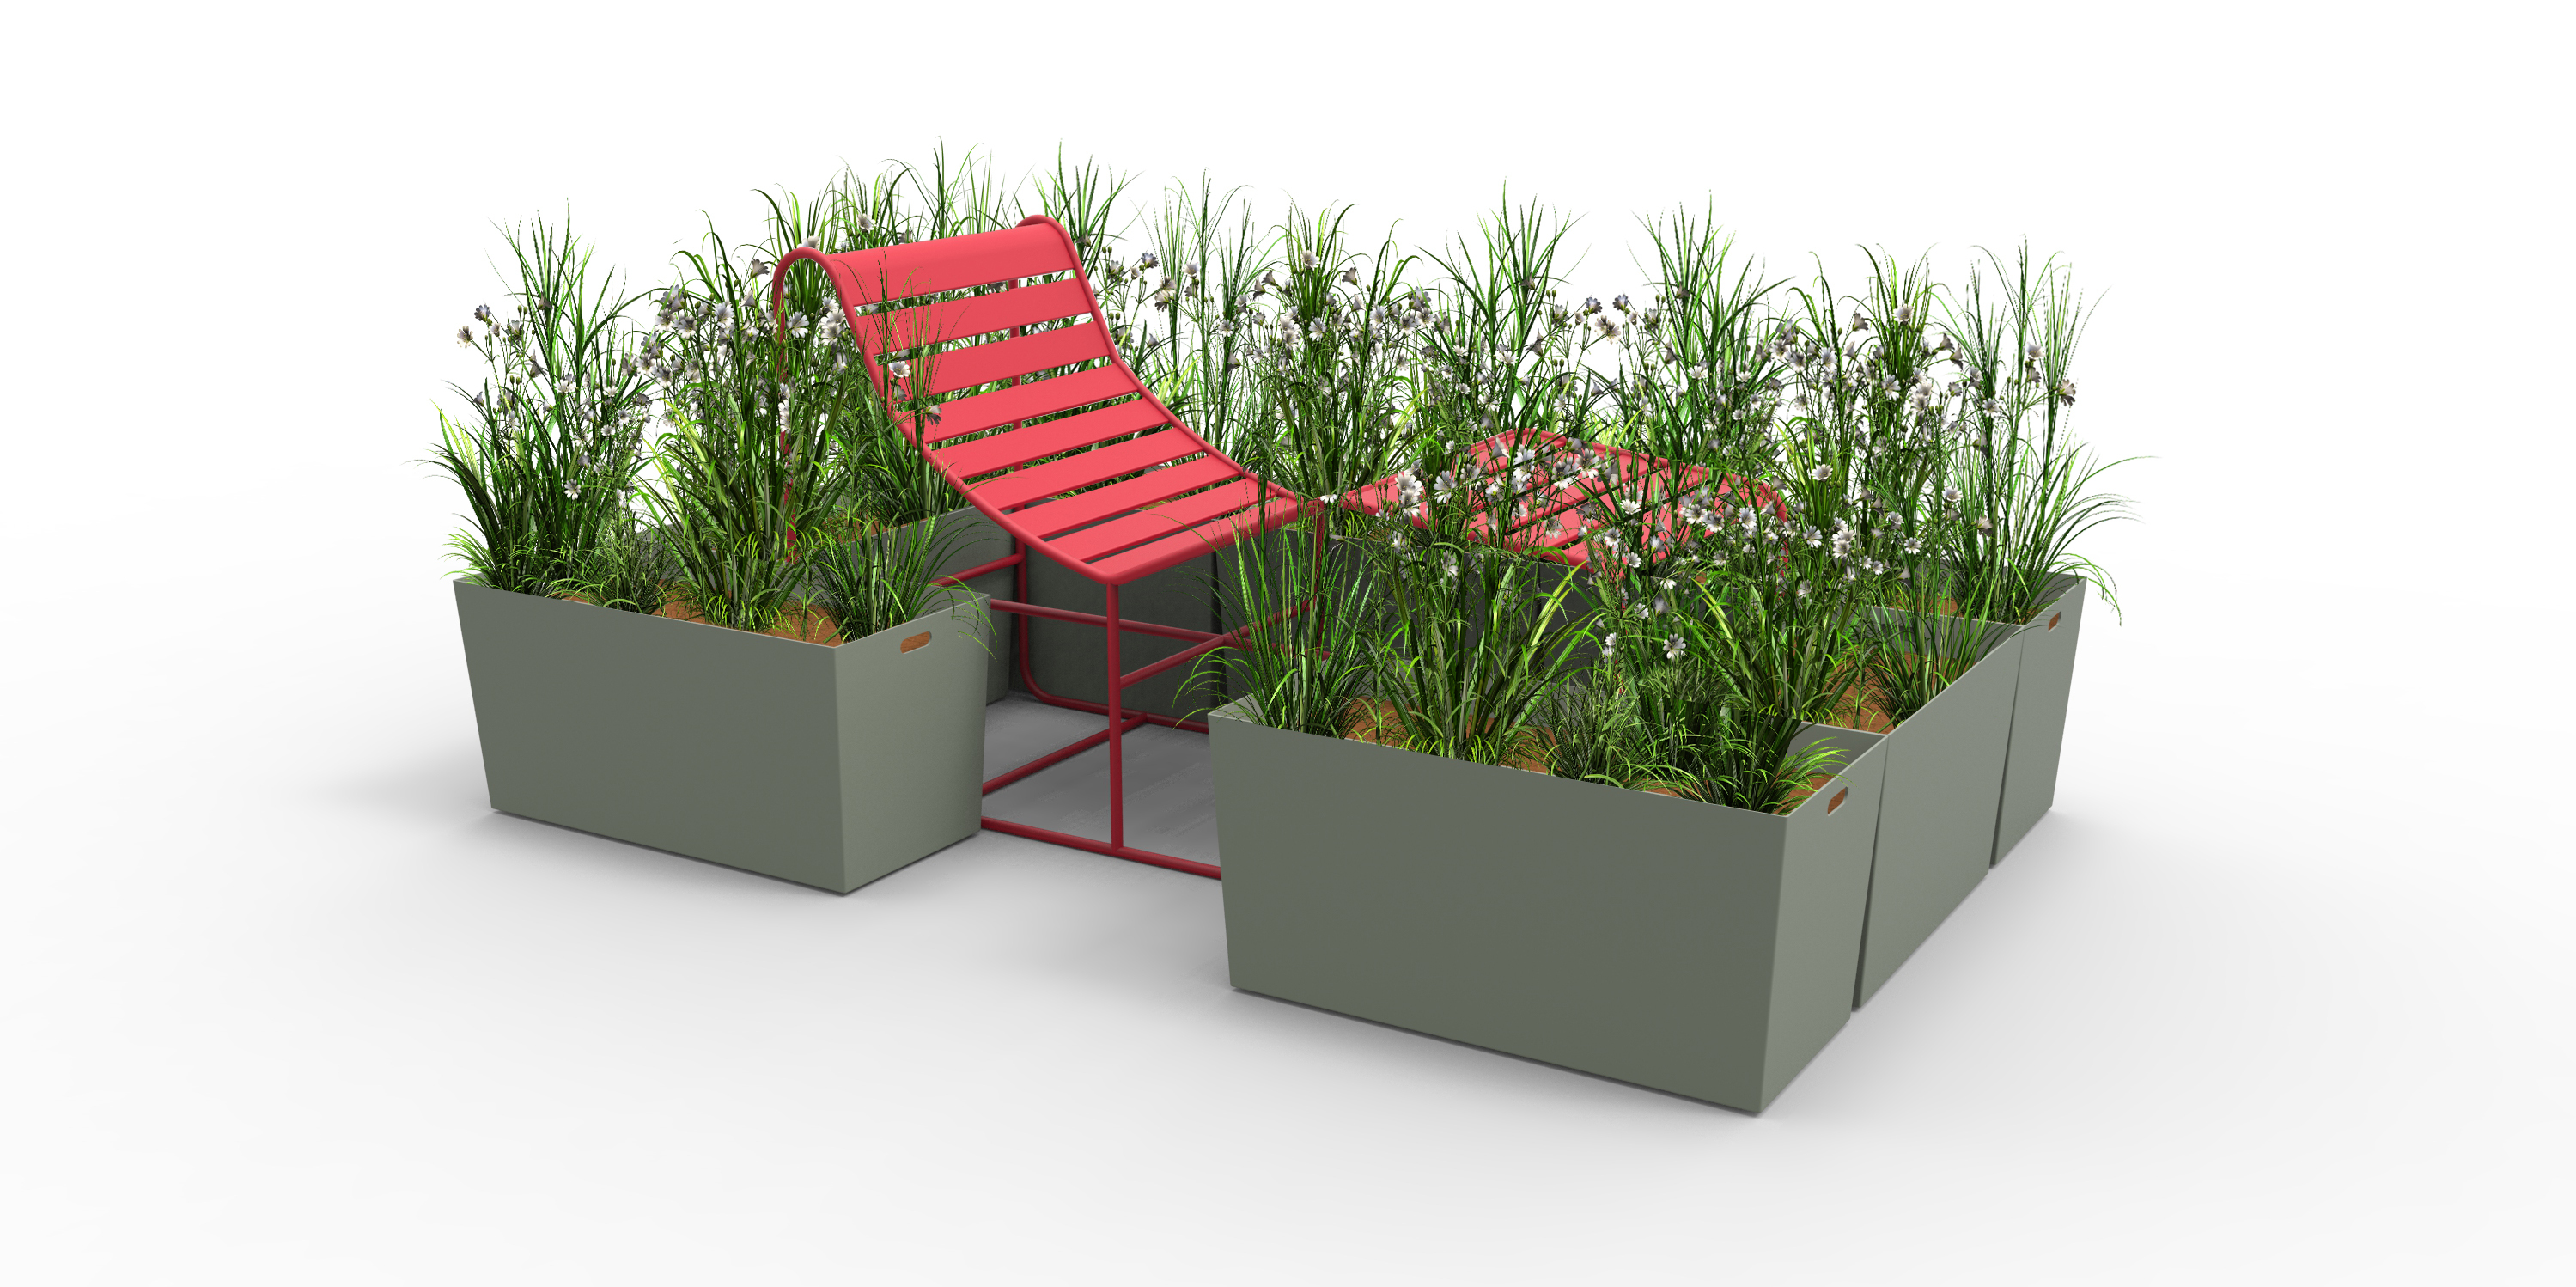 Inspire Lounger by Fermob